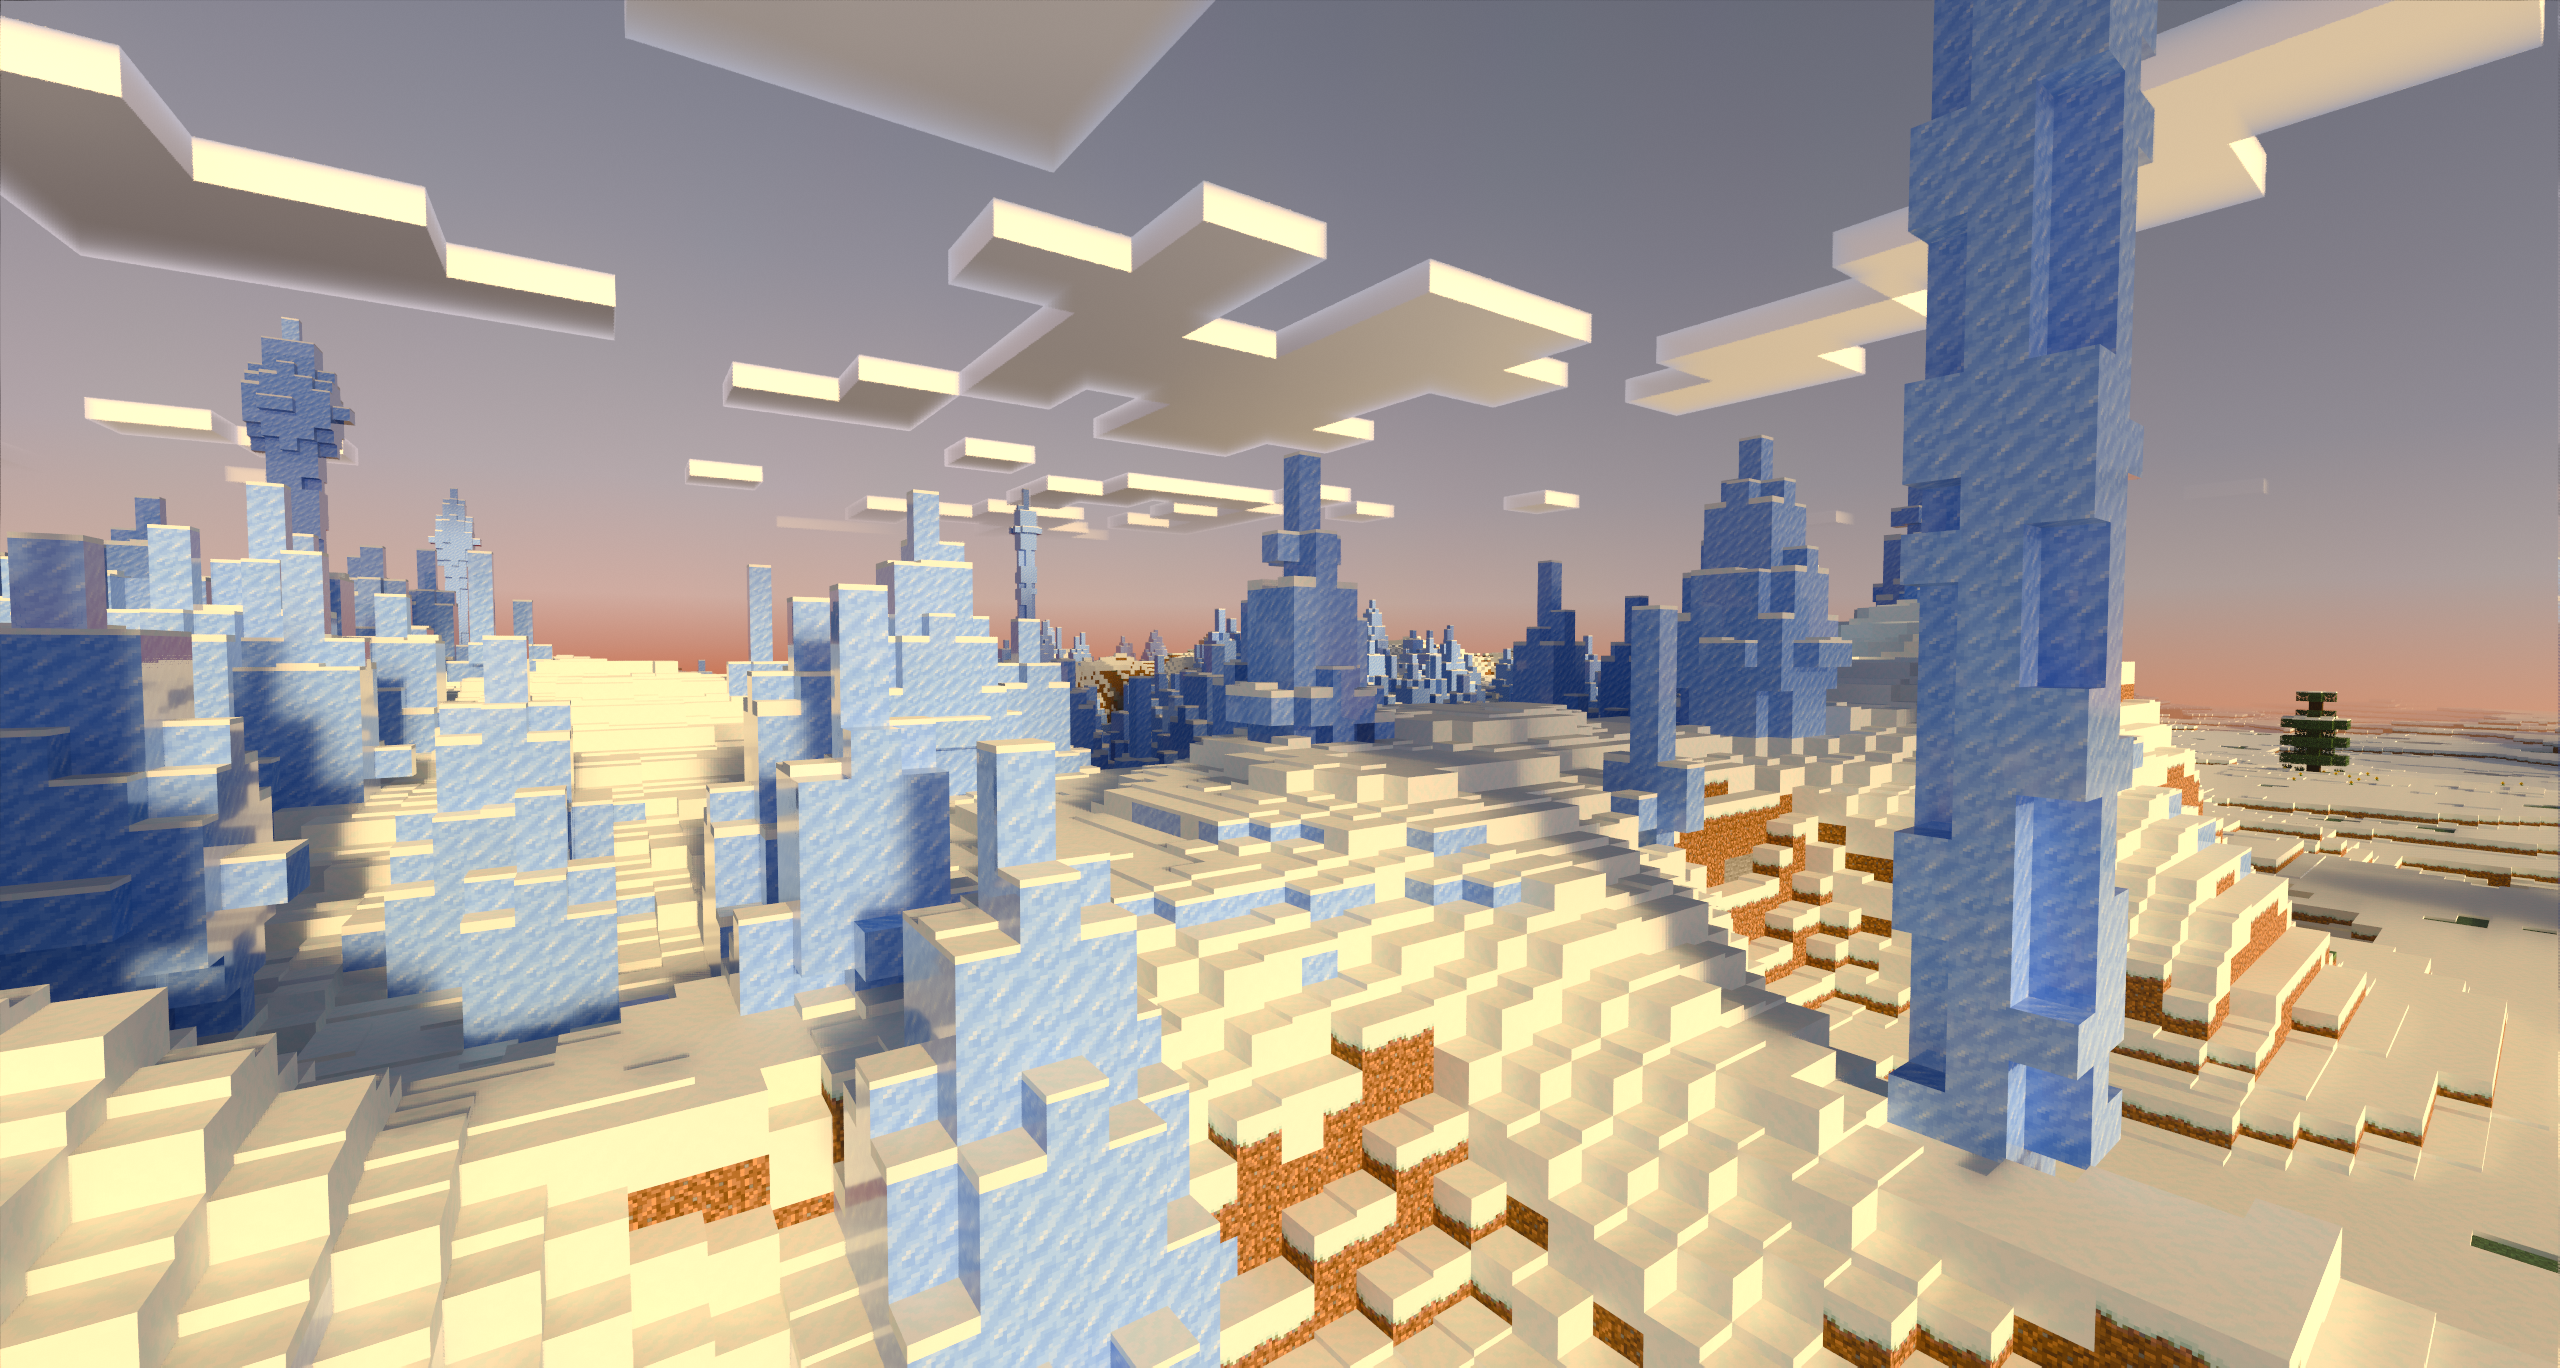 Minecraft Biome Guide - All The Cold, Wet, And Weird Biomes - GameSpot